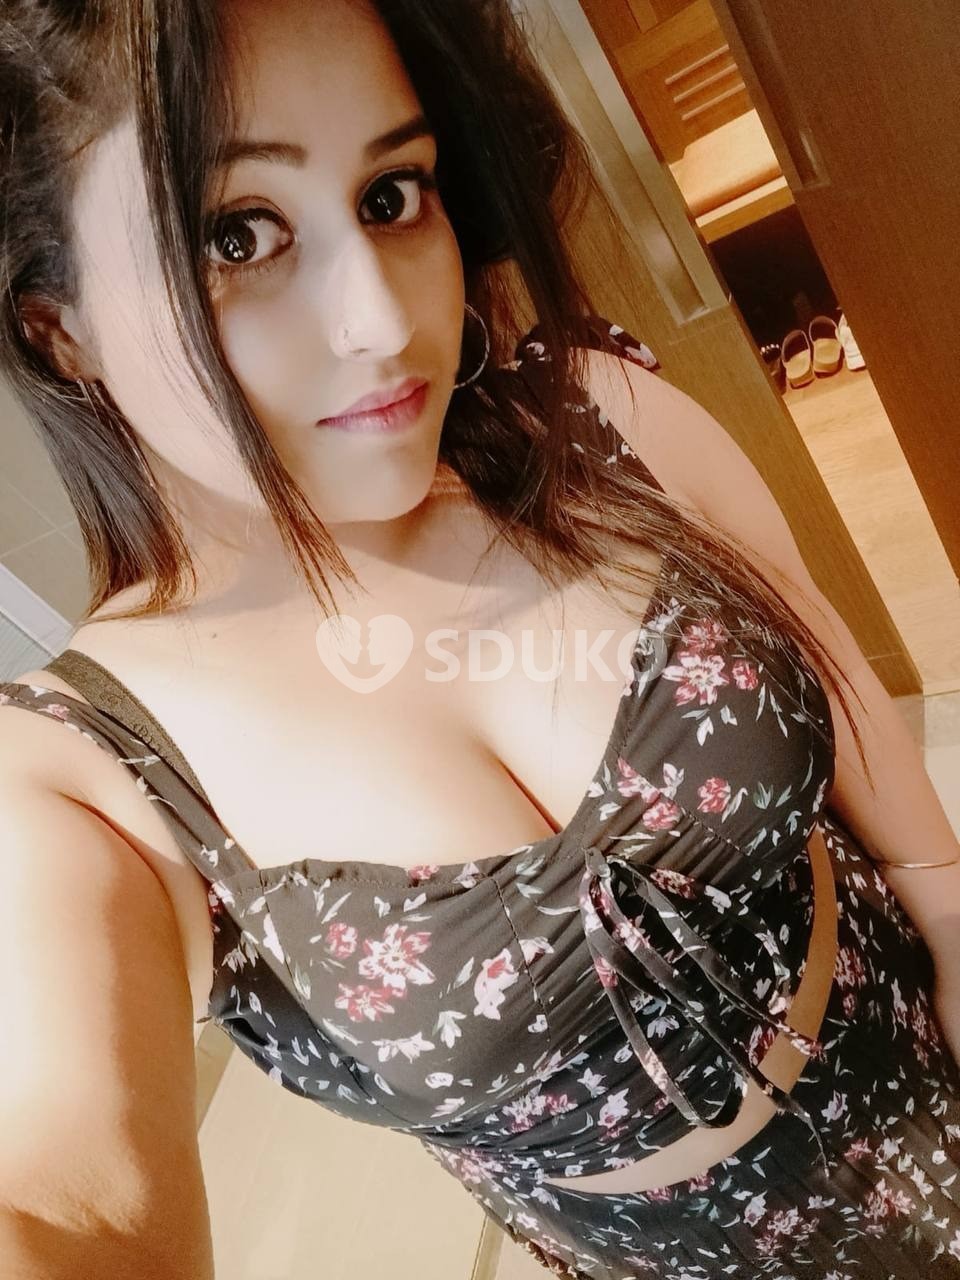 VADODARA INDEPENDENT GENUINE ESCORT SERVICE AVAILABLE CALL ME NOW KAVYA